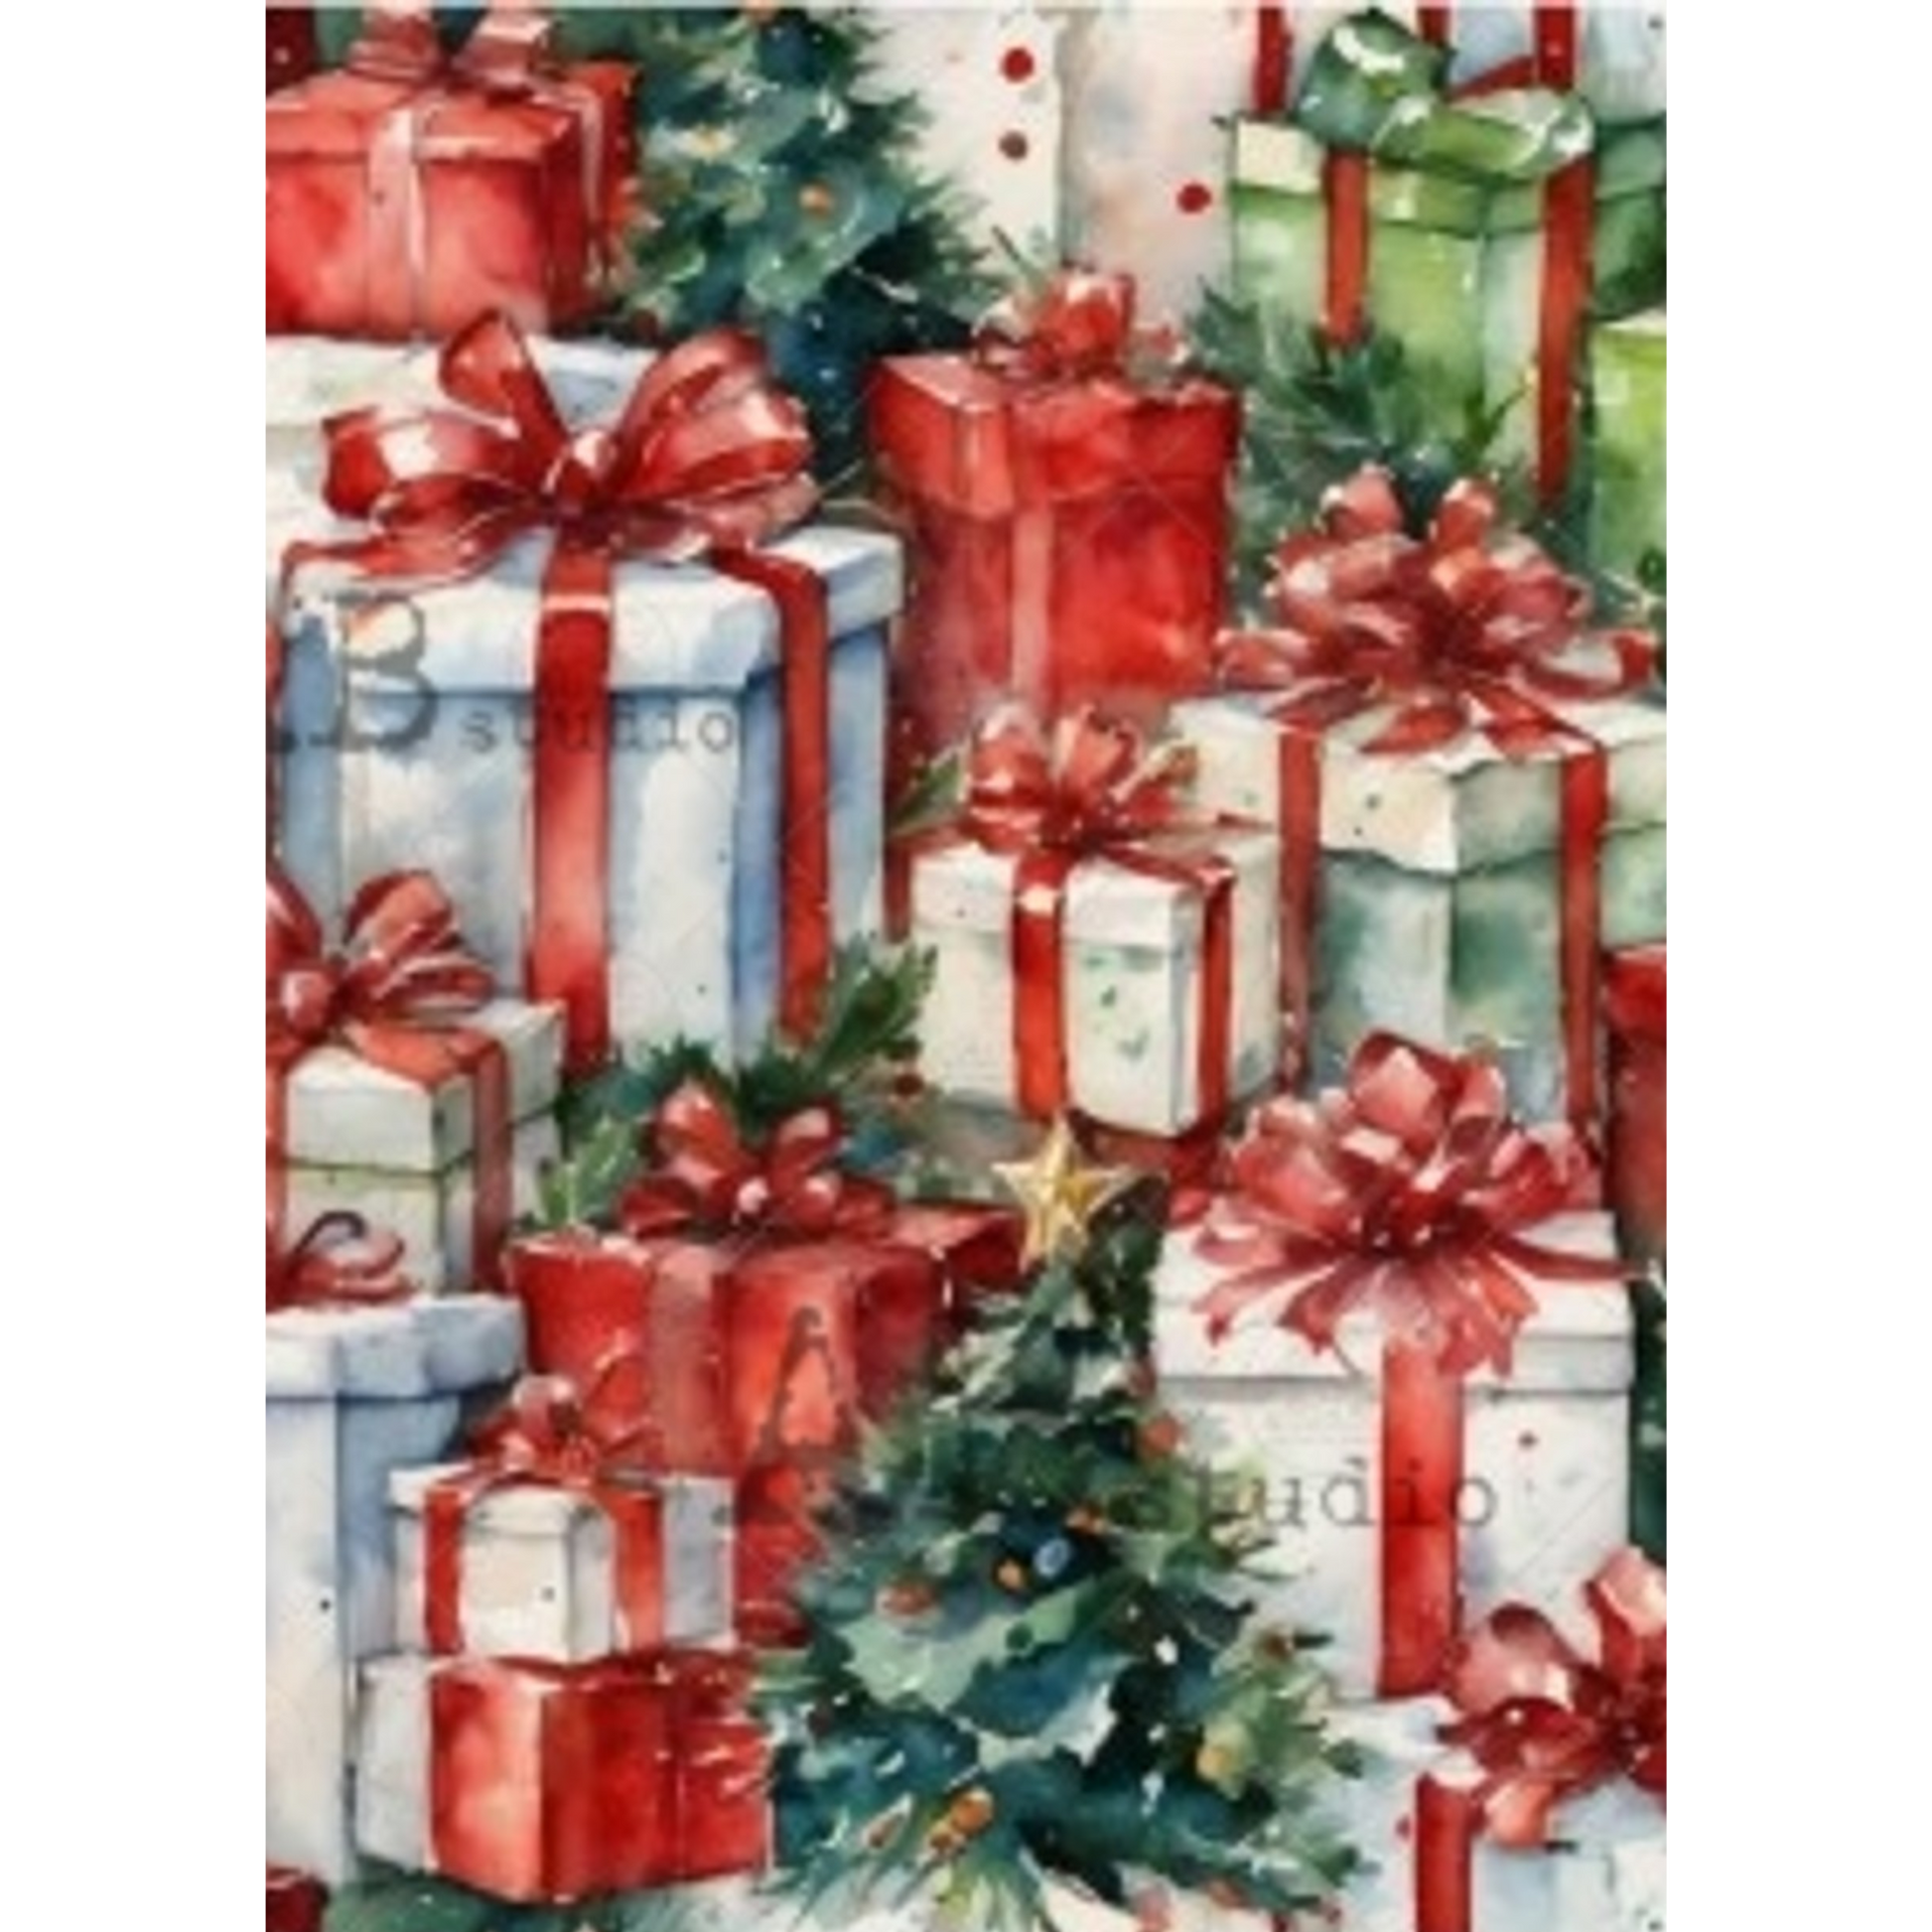 "Red & Green Gift Boxes" decoupage rice paper by AB Studio. Available at Milton's Daughter.